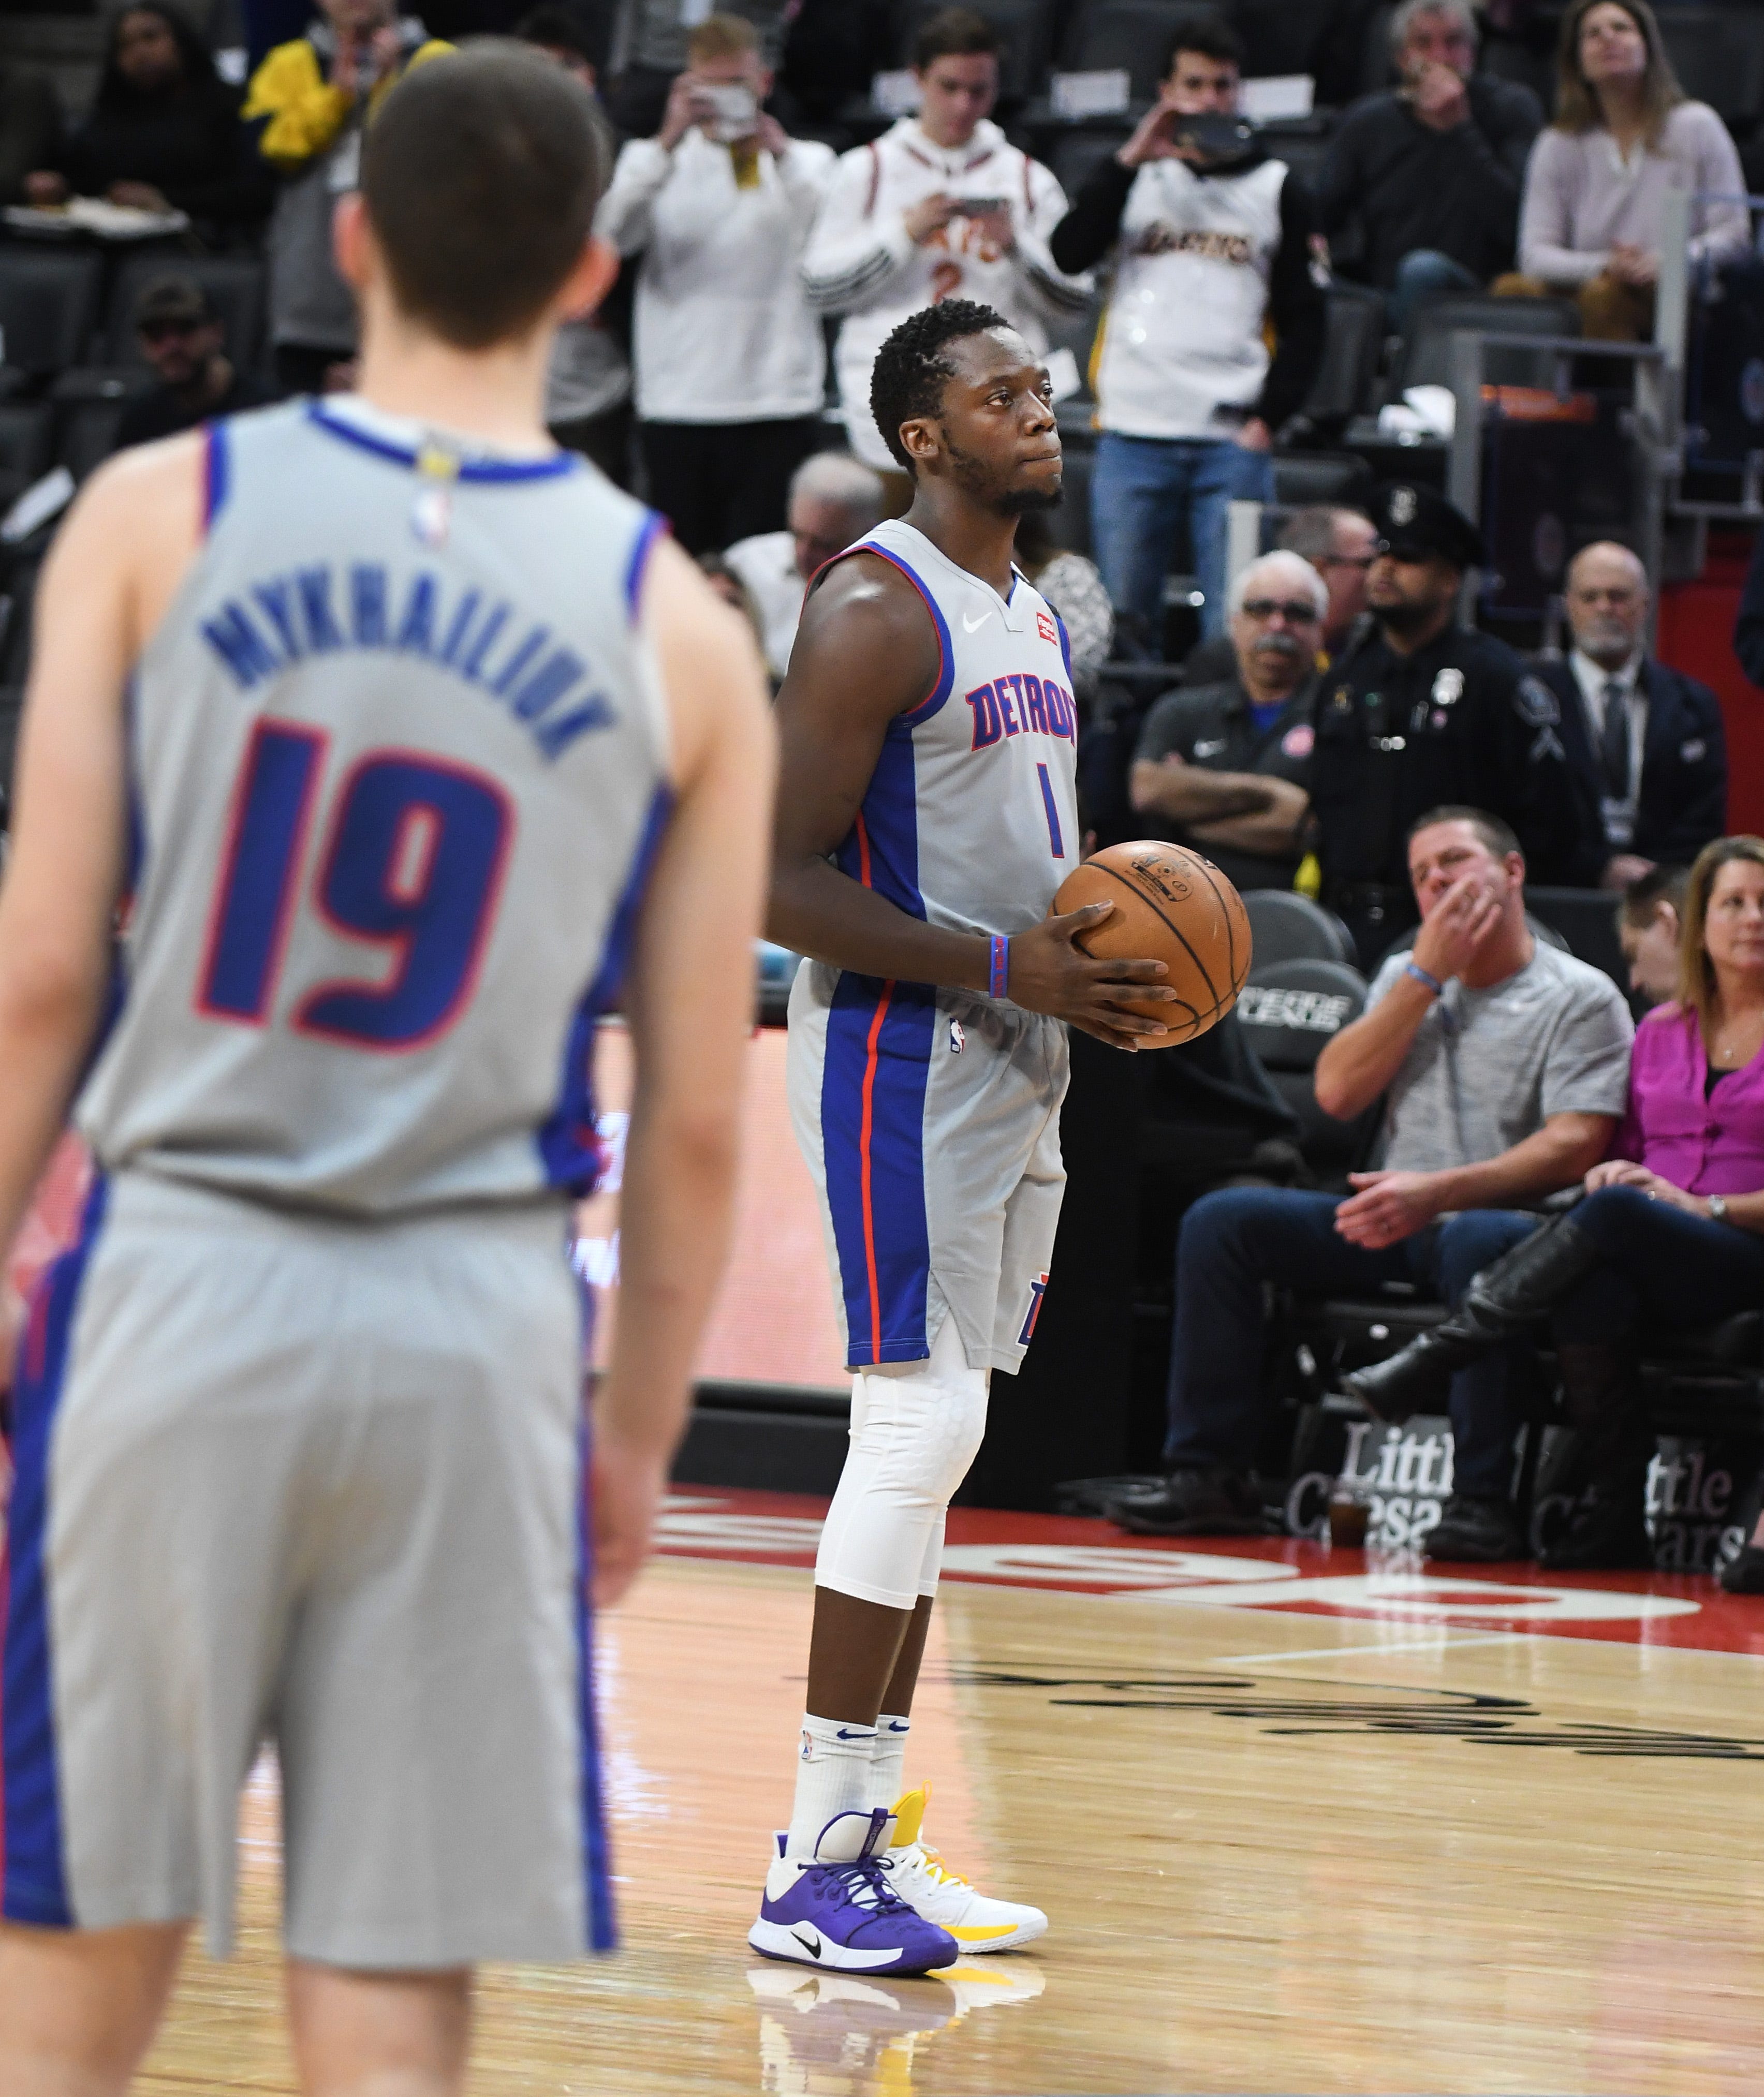 Pistons' Reggie Jackson holds onto the ball for an 8-second backcourt violation in memory of Kobe Bryant when he wore the No. 8 jersey at the start of the game against the Cleveland Cavaliers.